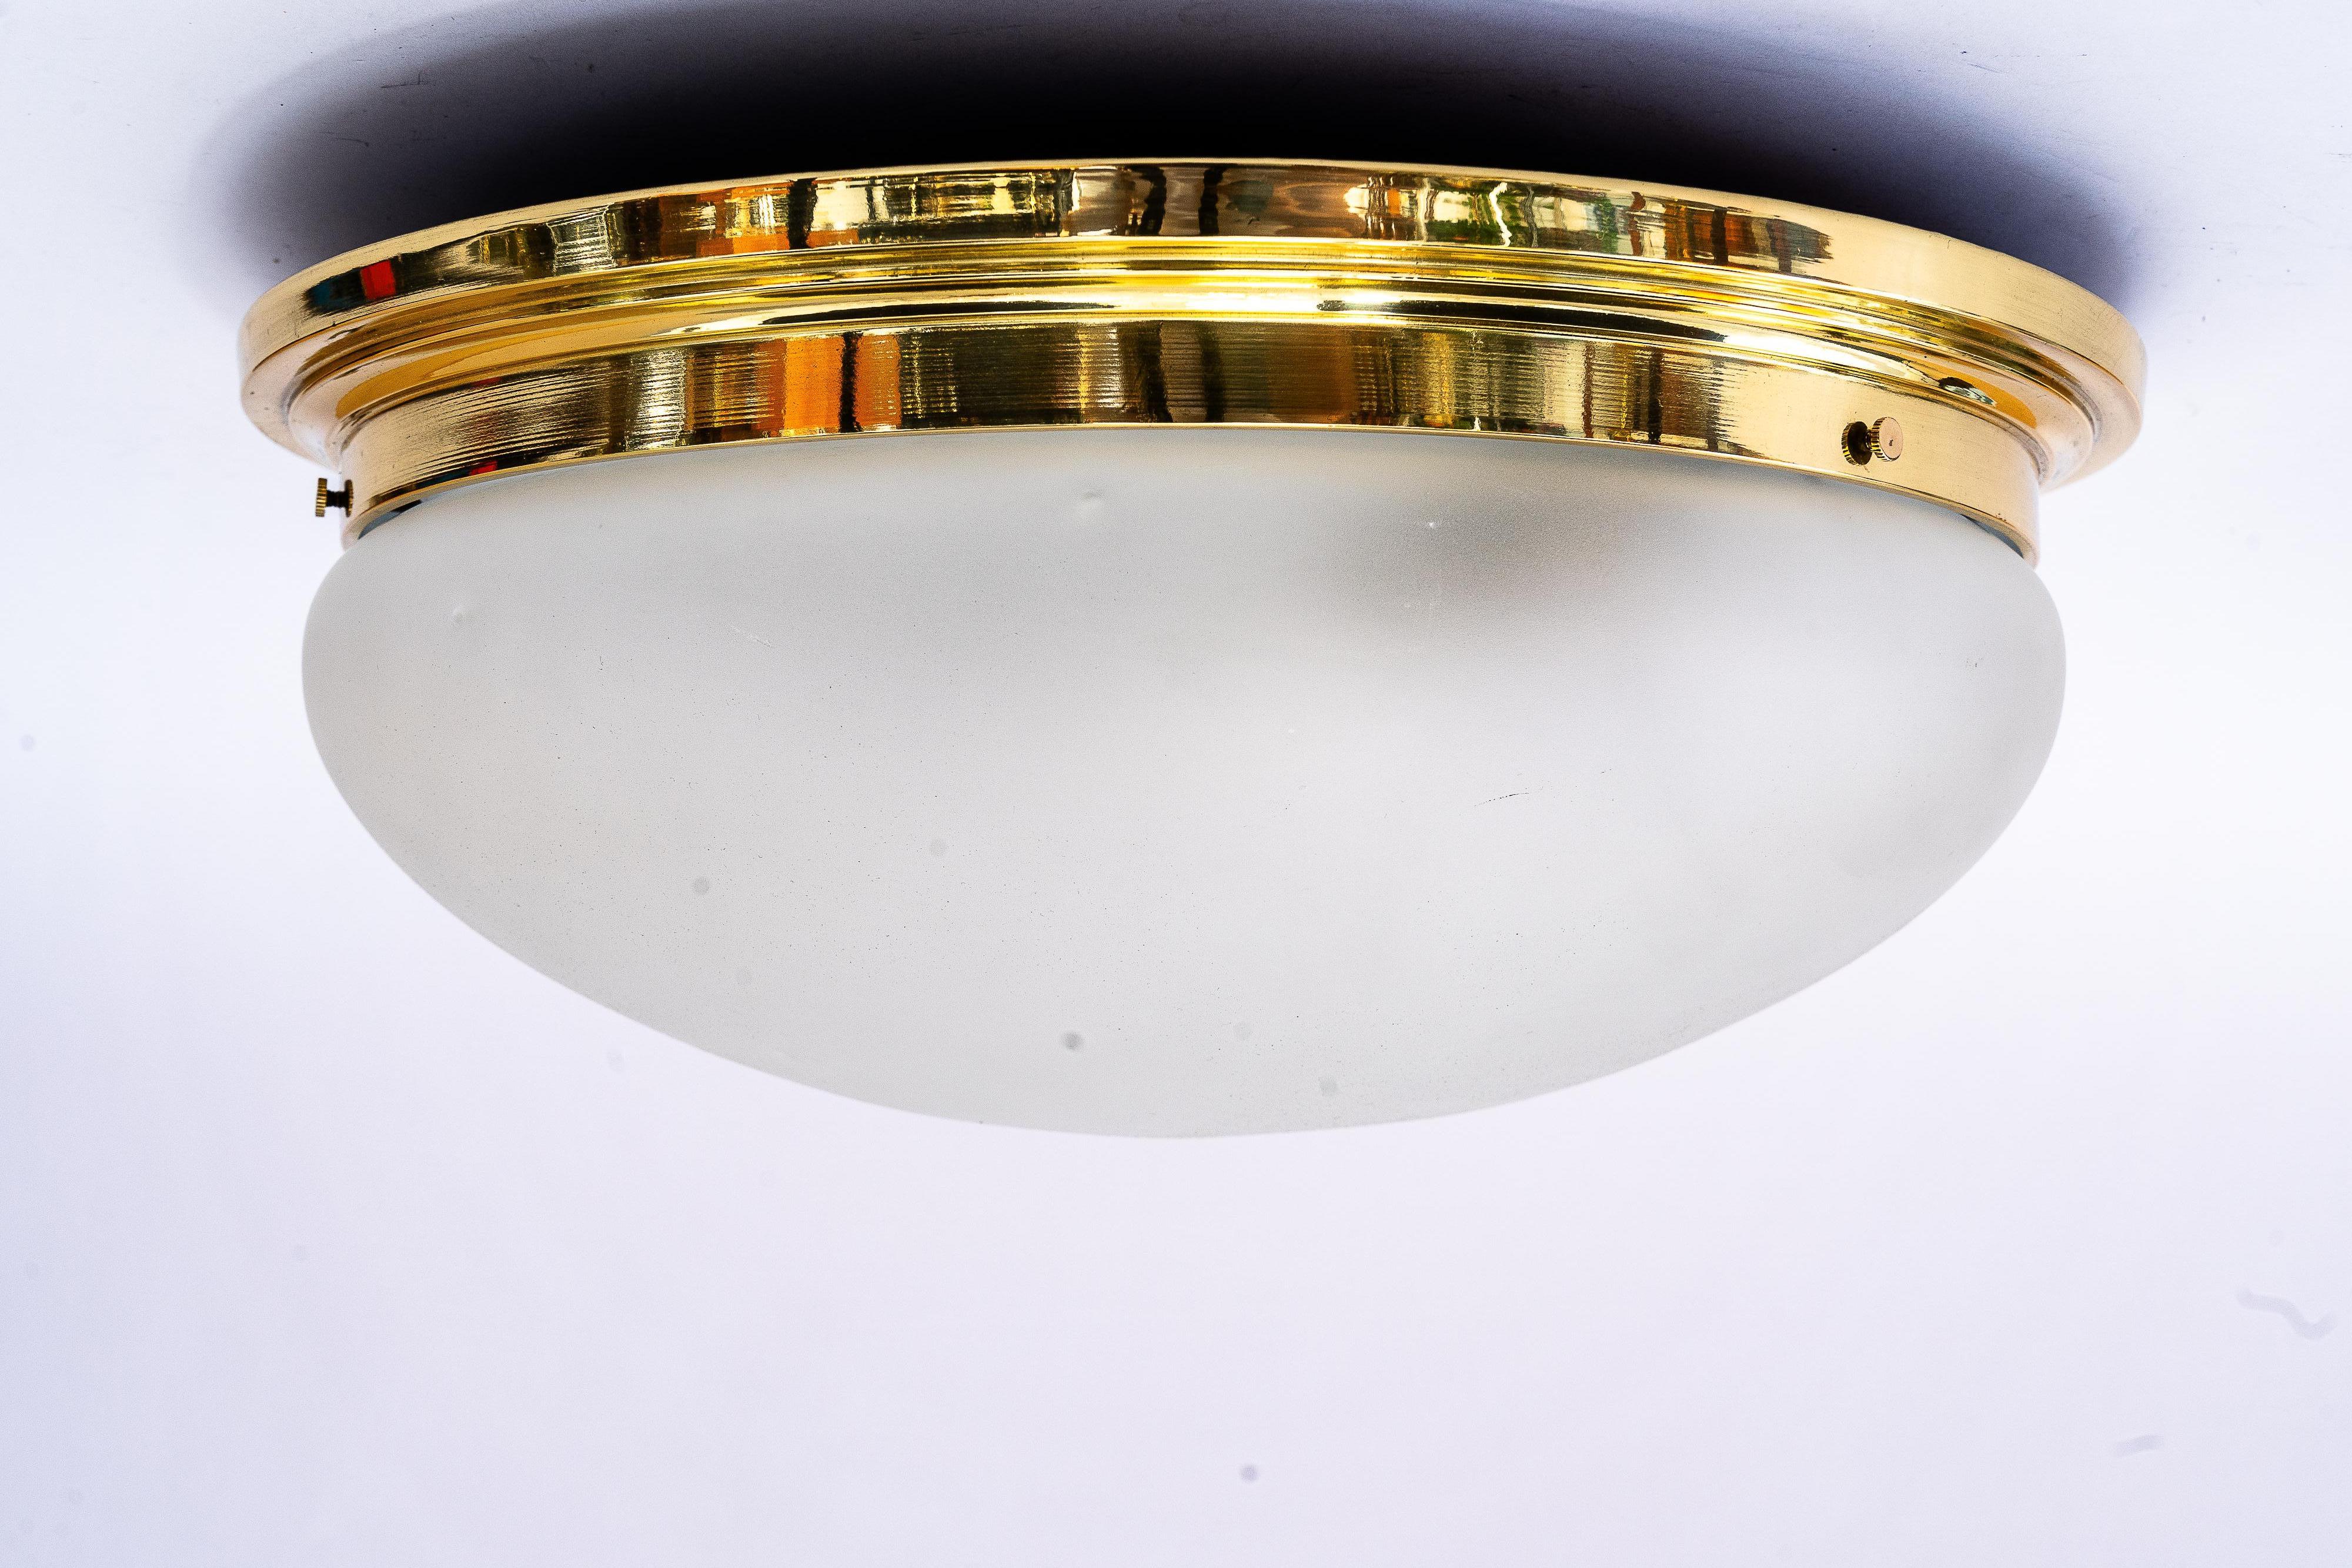 Art Deco ceiling lamp vienna around 1920s
Brass polished and stove enameled
Original frosted glass shade